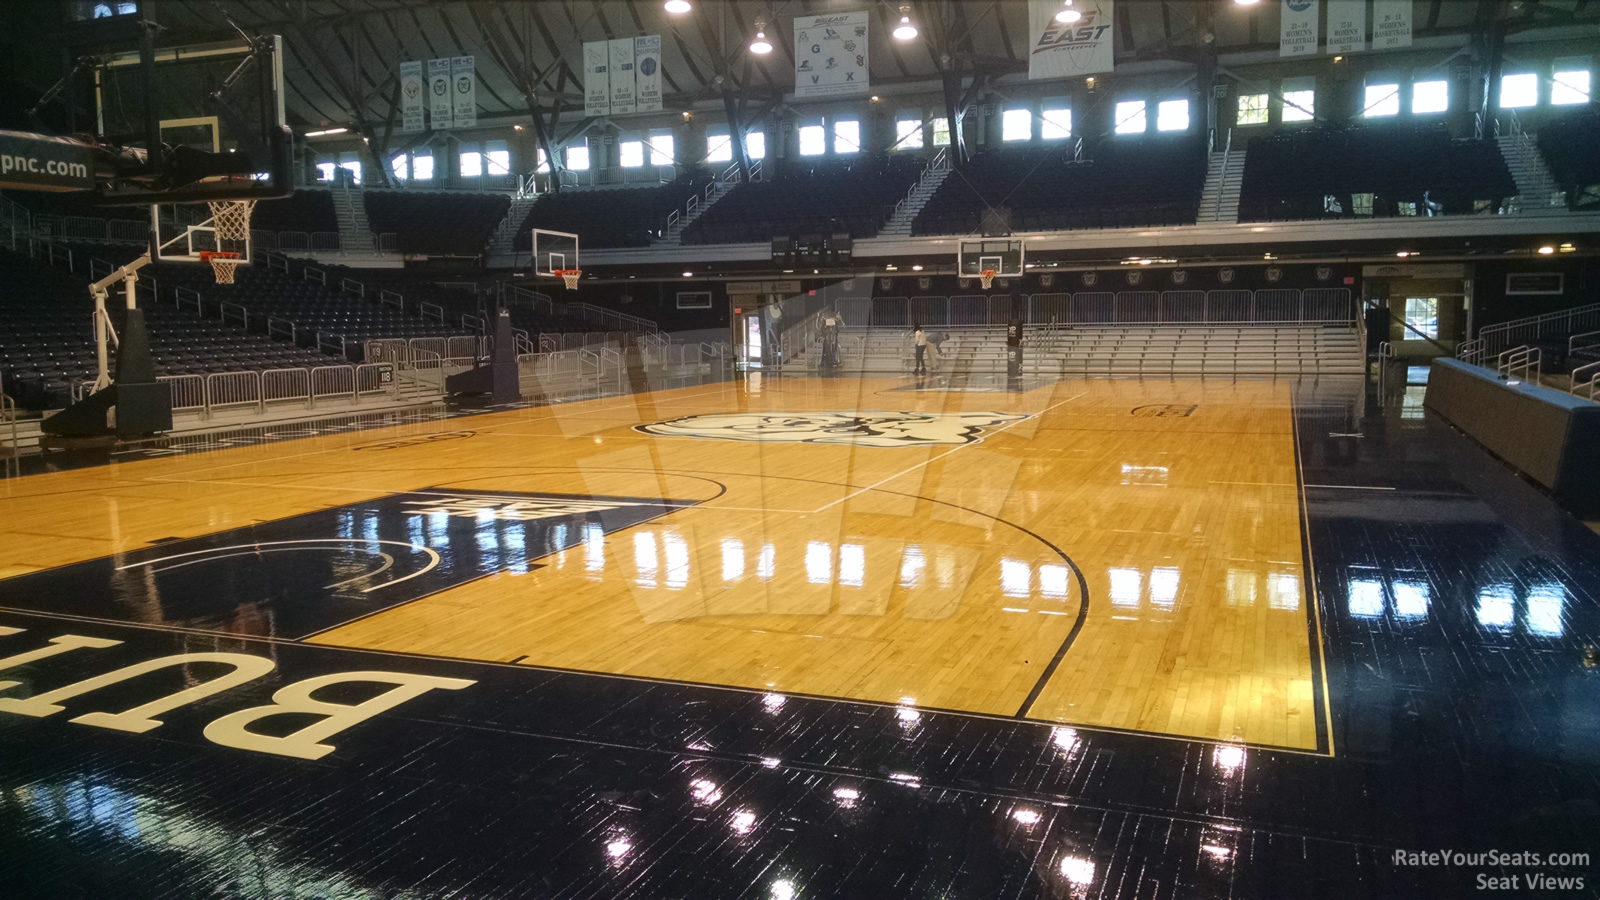 section 111, row 2 seat view  - hinkle fieldhouse